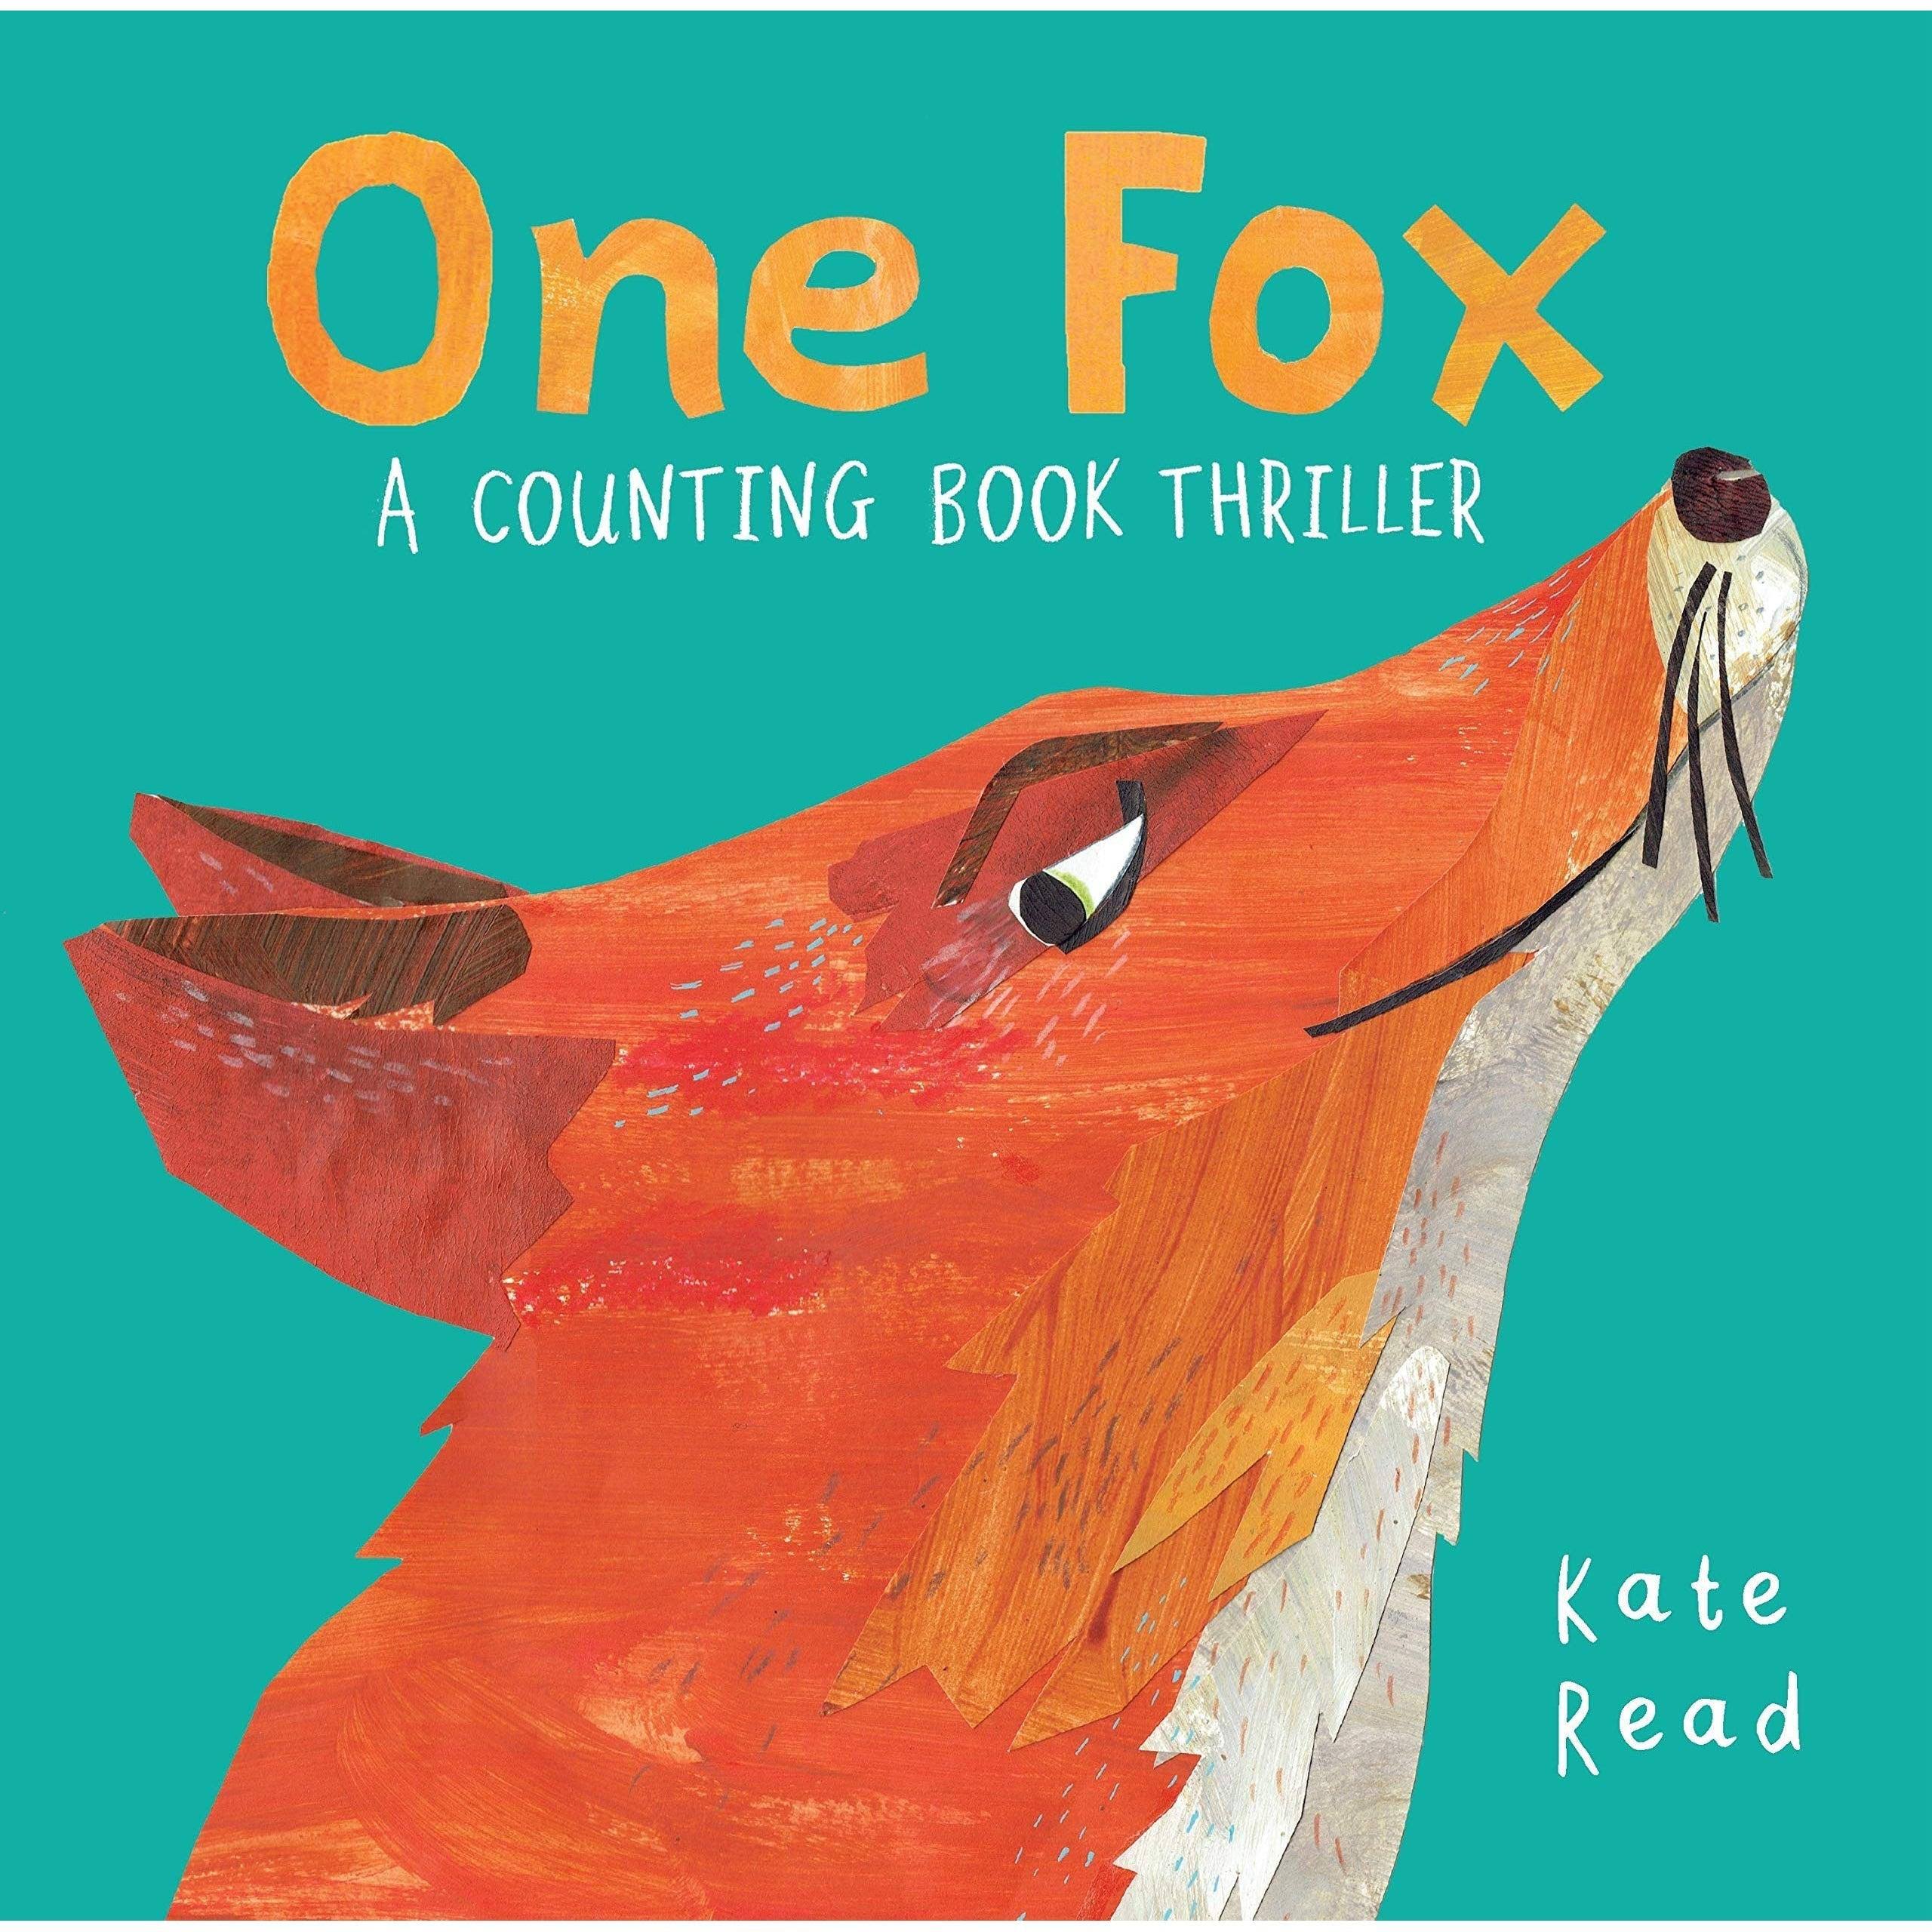 One Fox by Kate Read